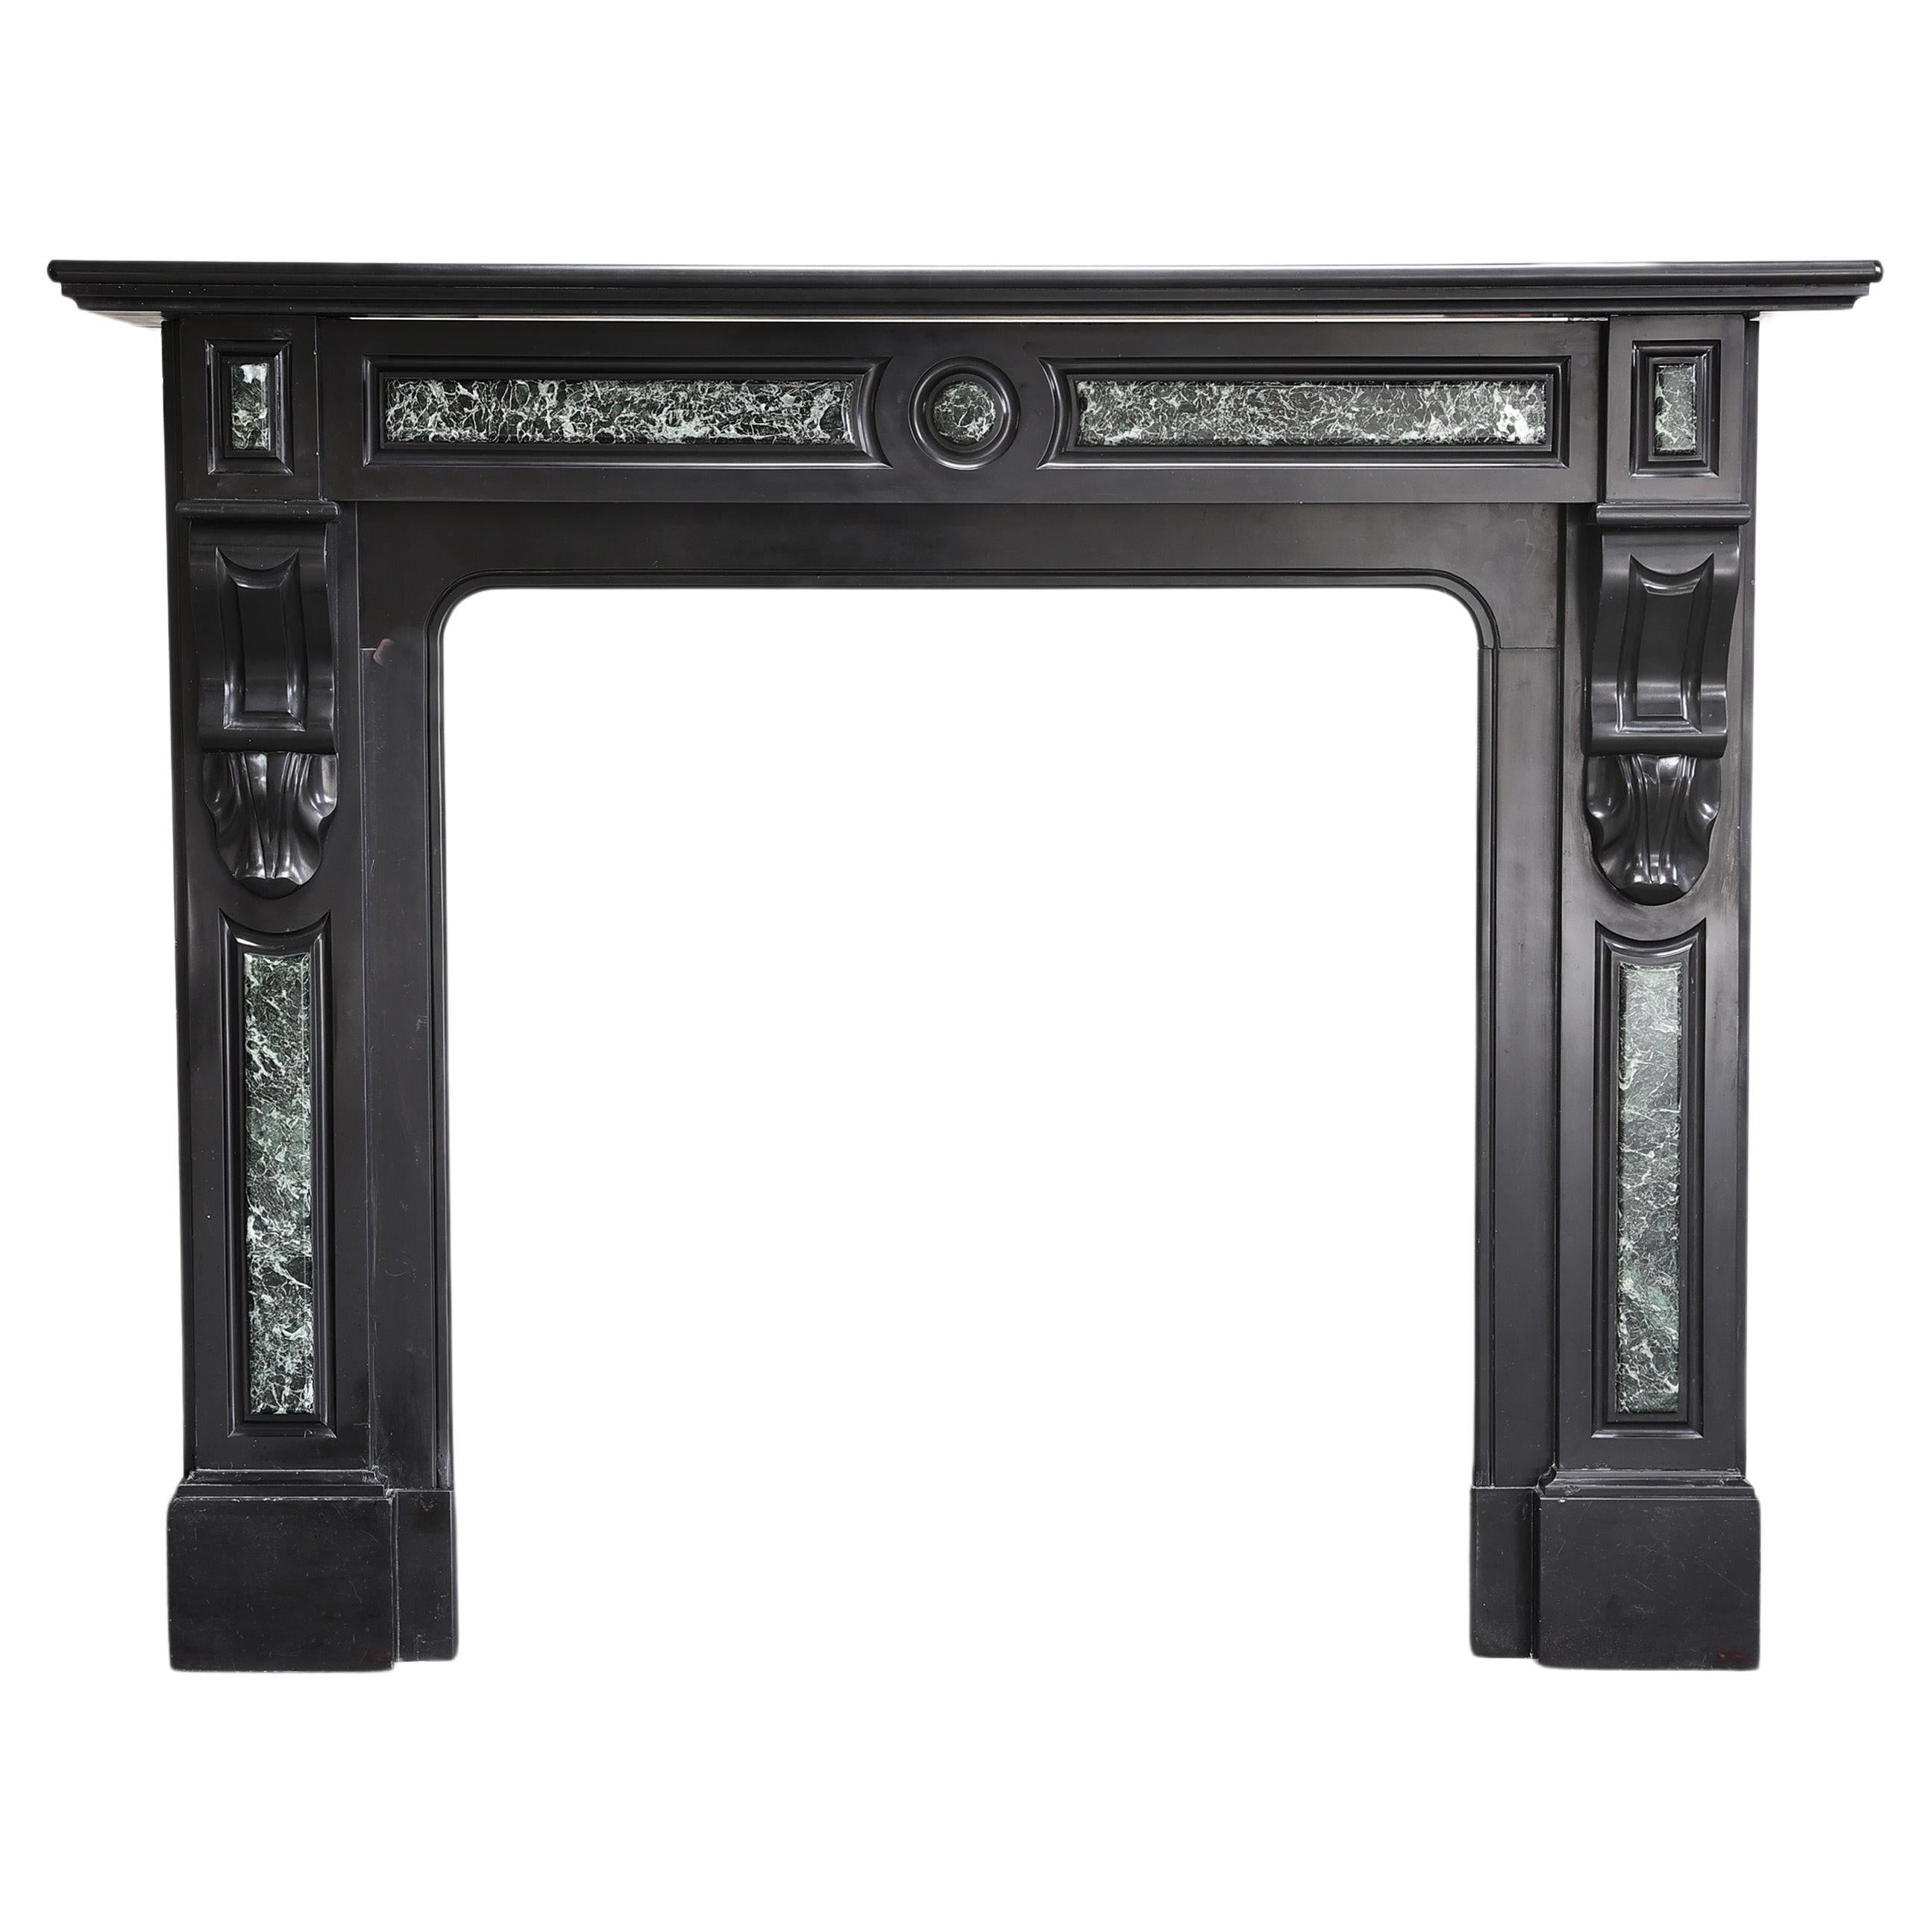 antique marble fireplace of Noir de Mazy marble in style of Louis XVI For Sale